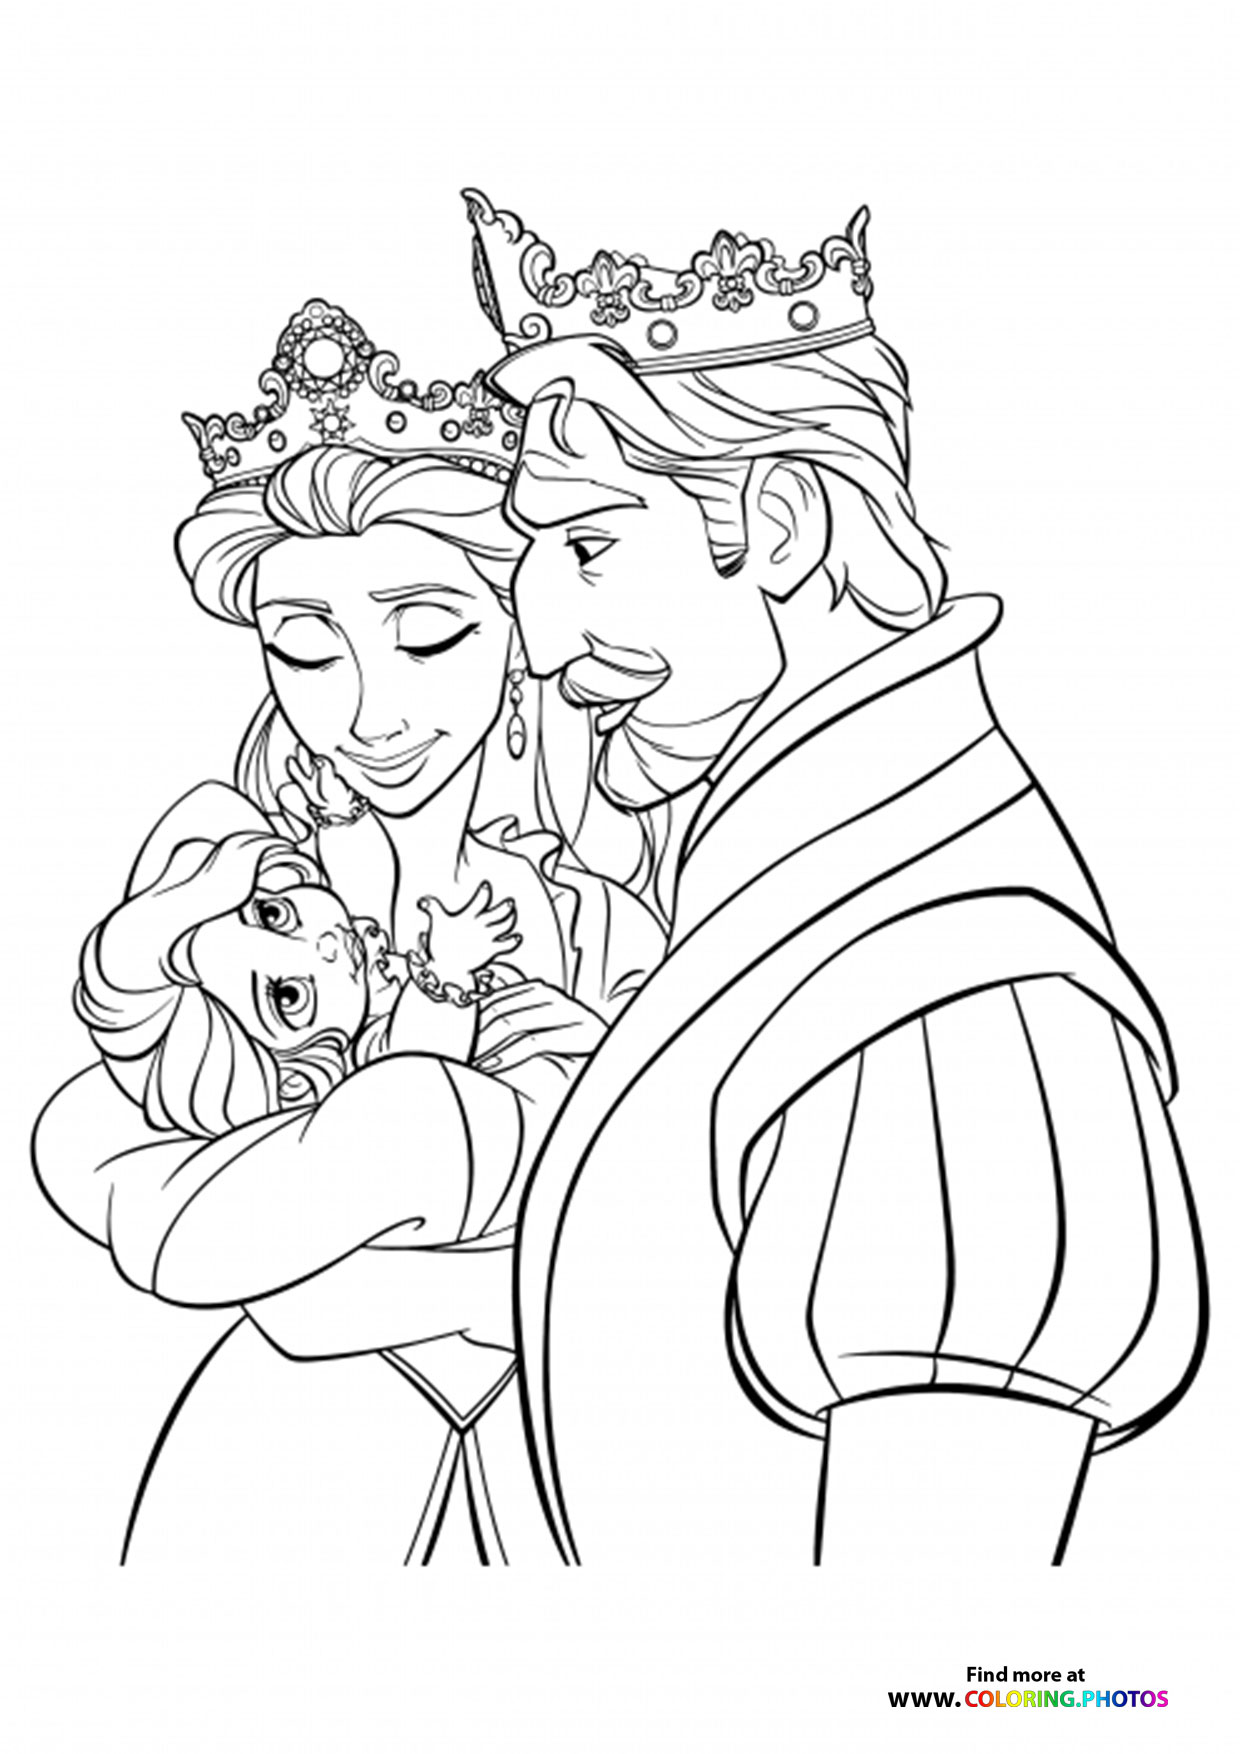 King and Queen with baby Rapunzel   Coloring Pages for kids